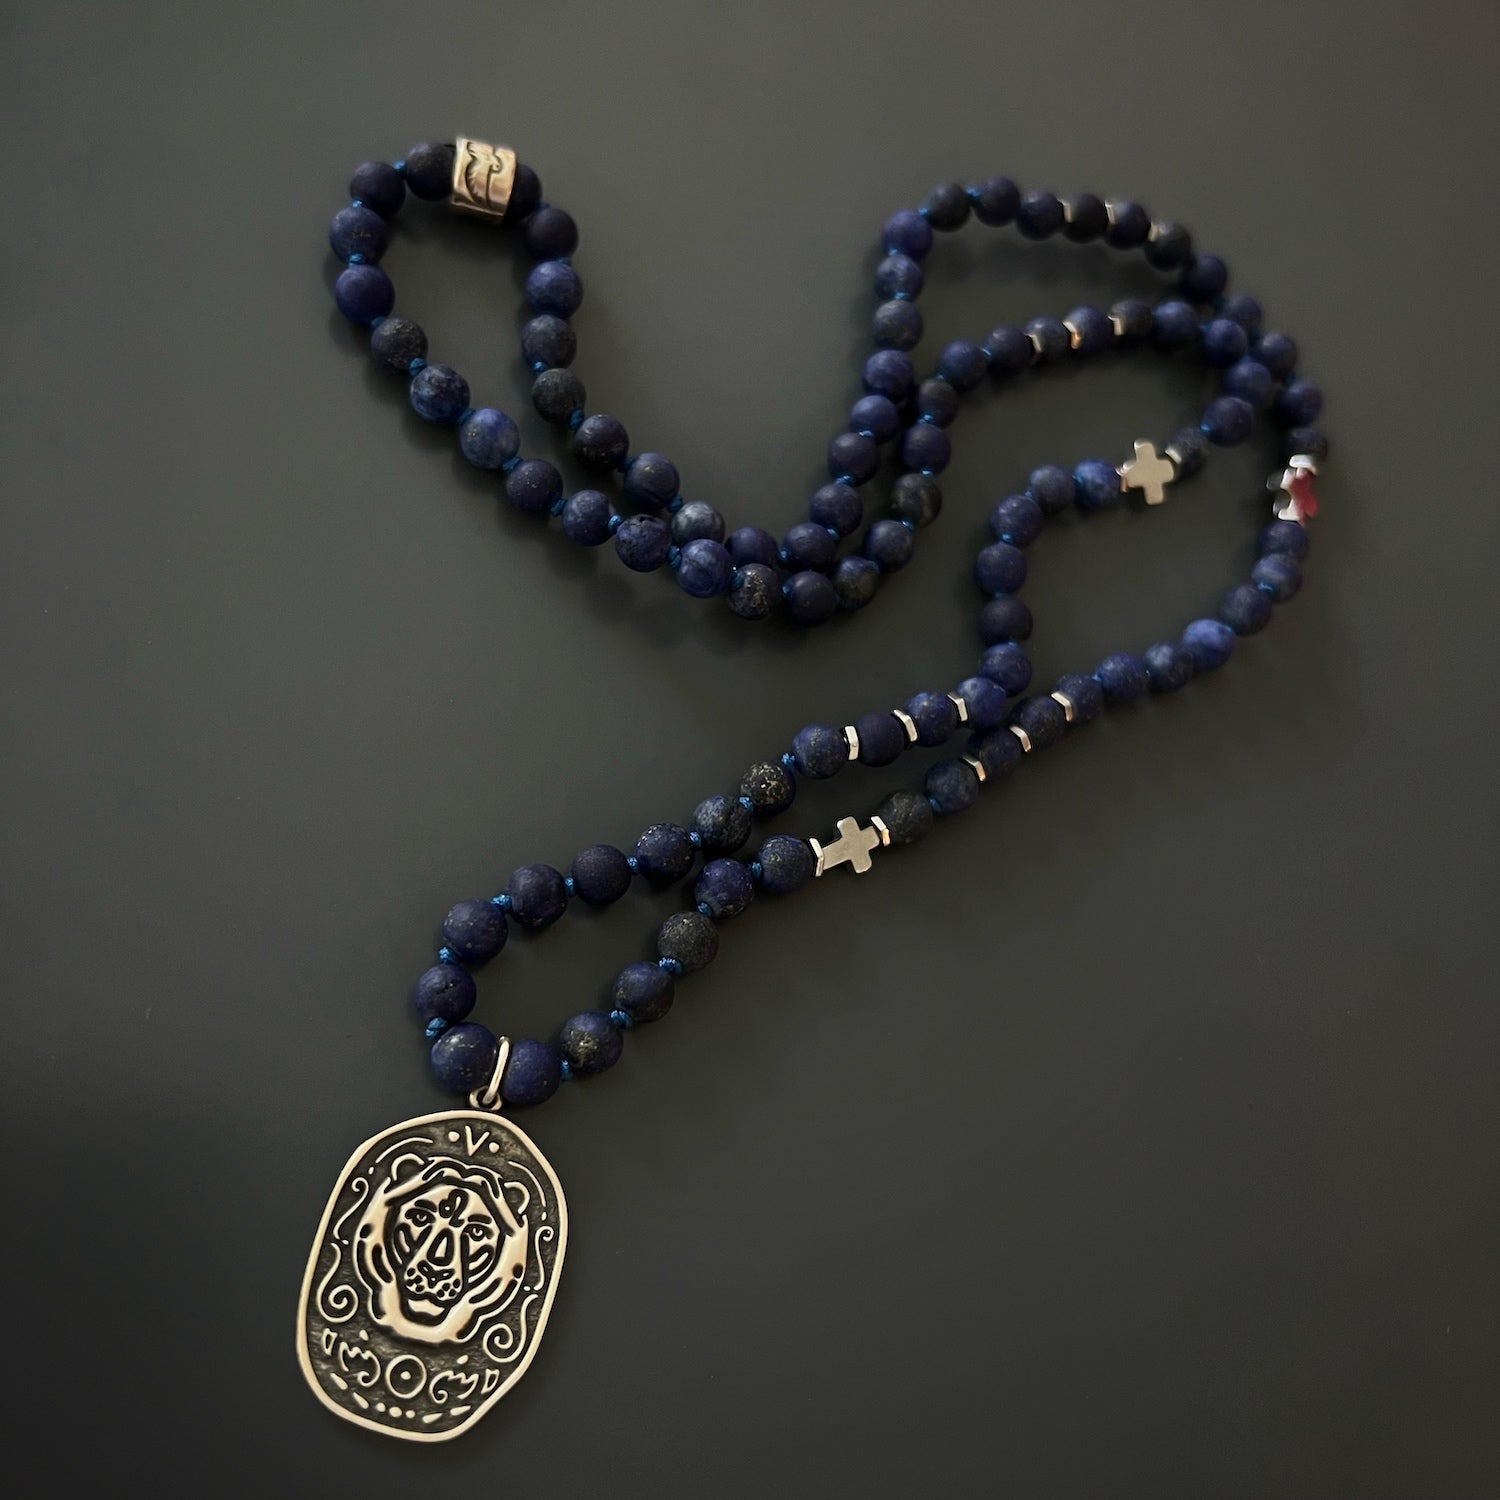 The Spiritual Lapis Lazuli Lion necklace showcases the perfect blend of elegance and symbolism, making it a unique and special piece.